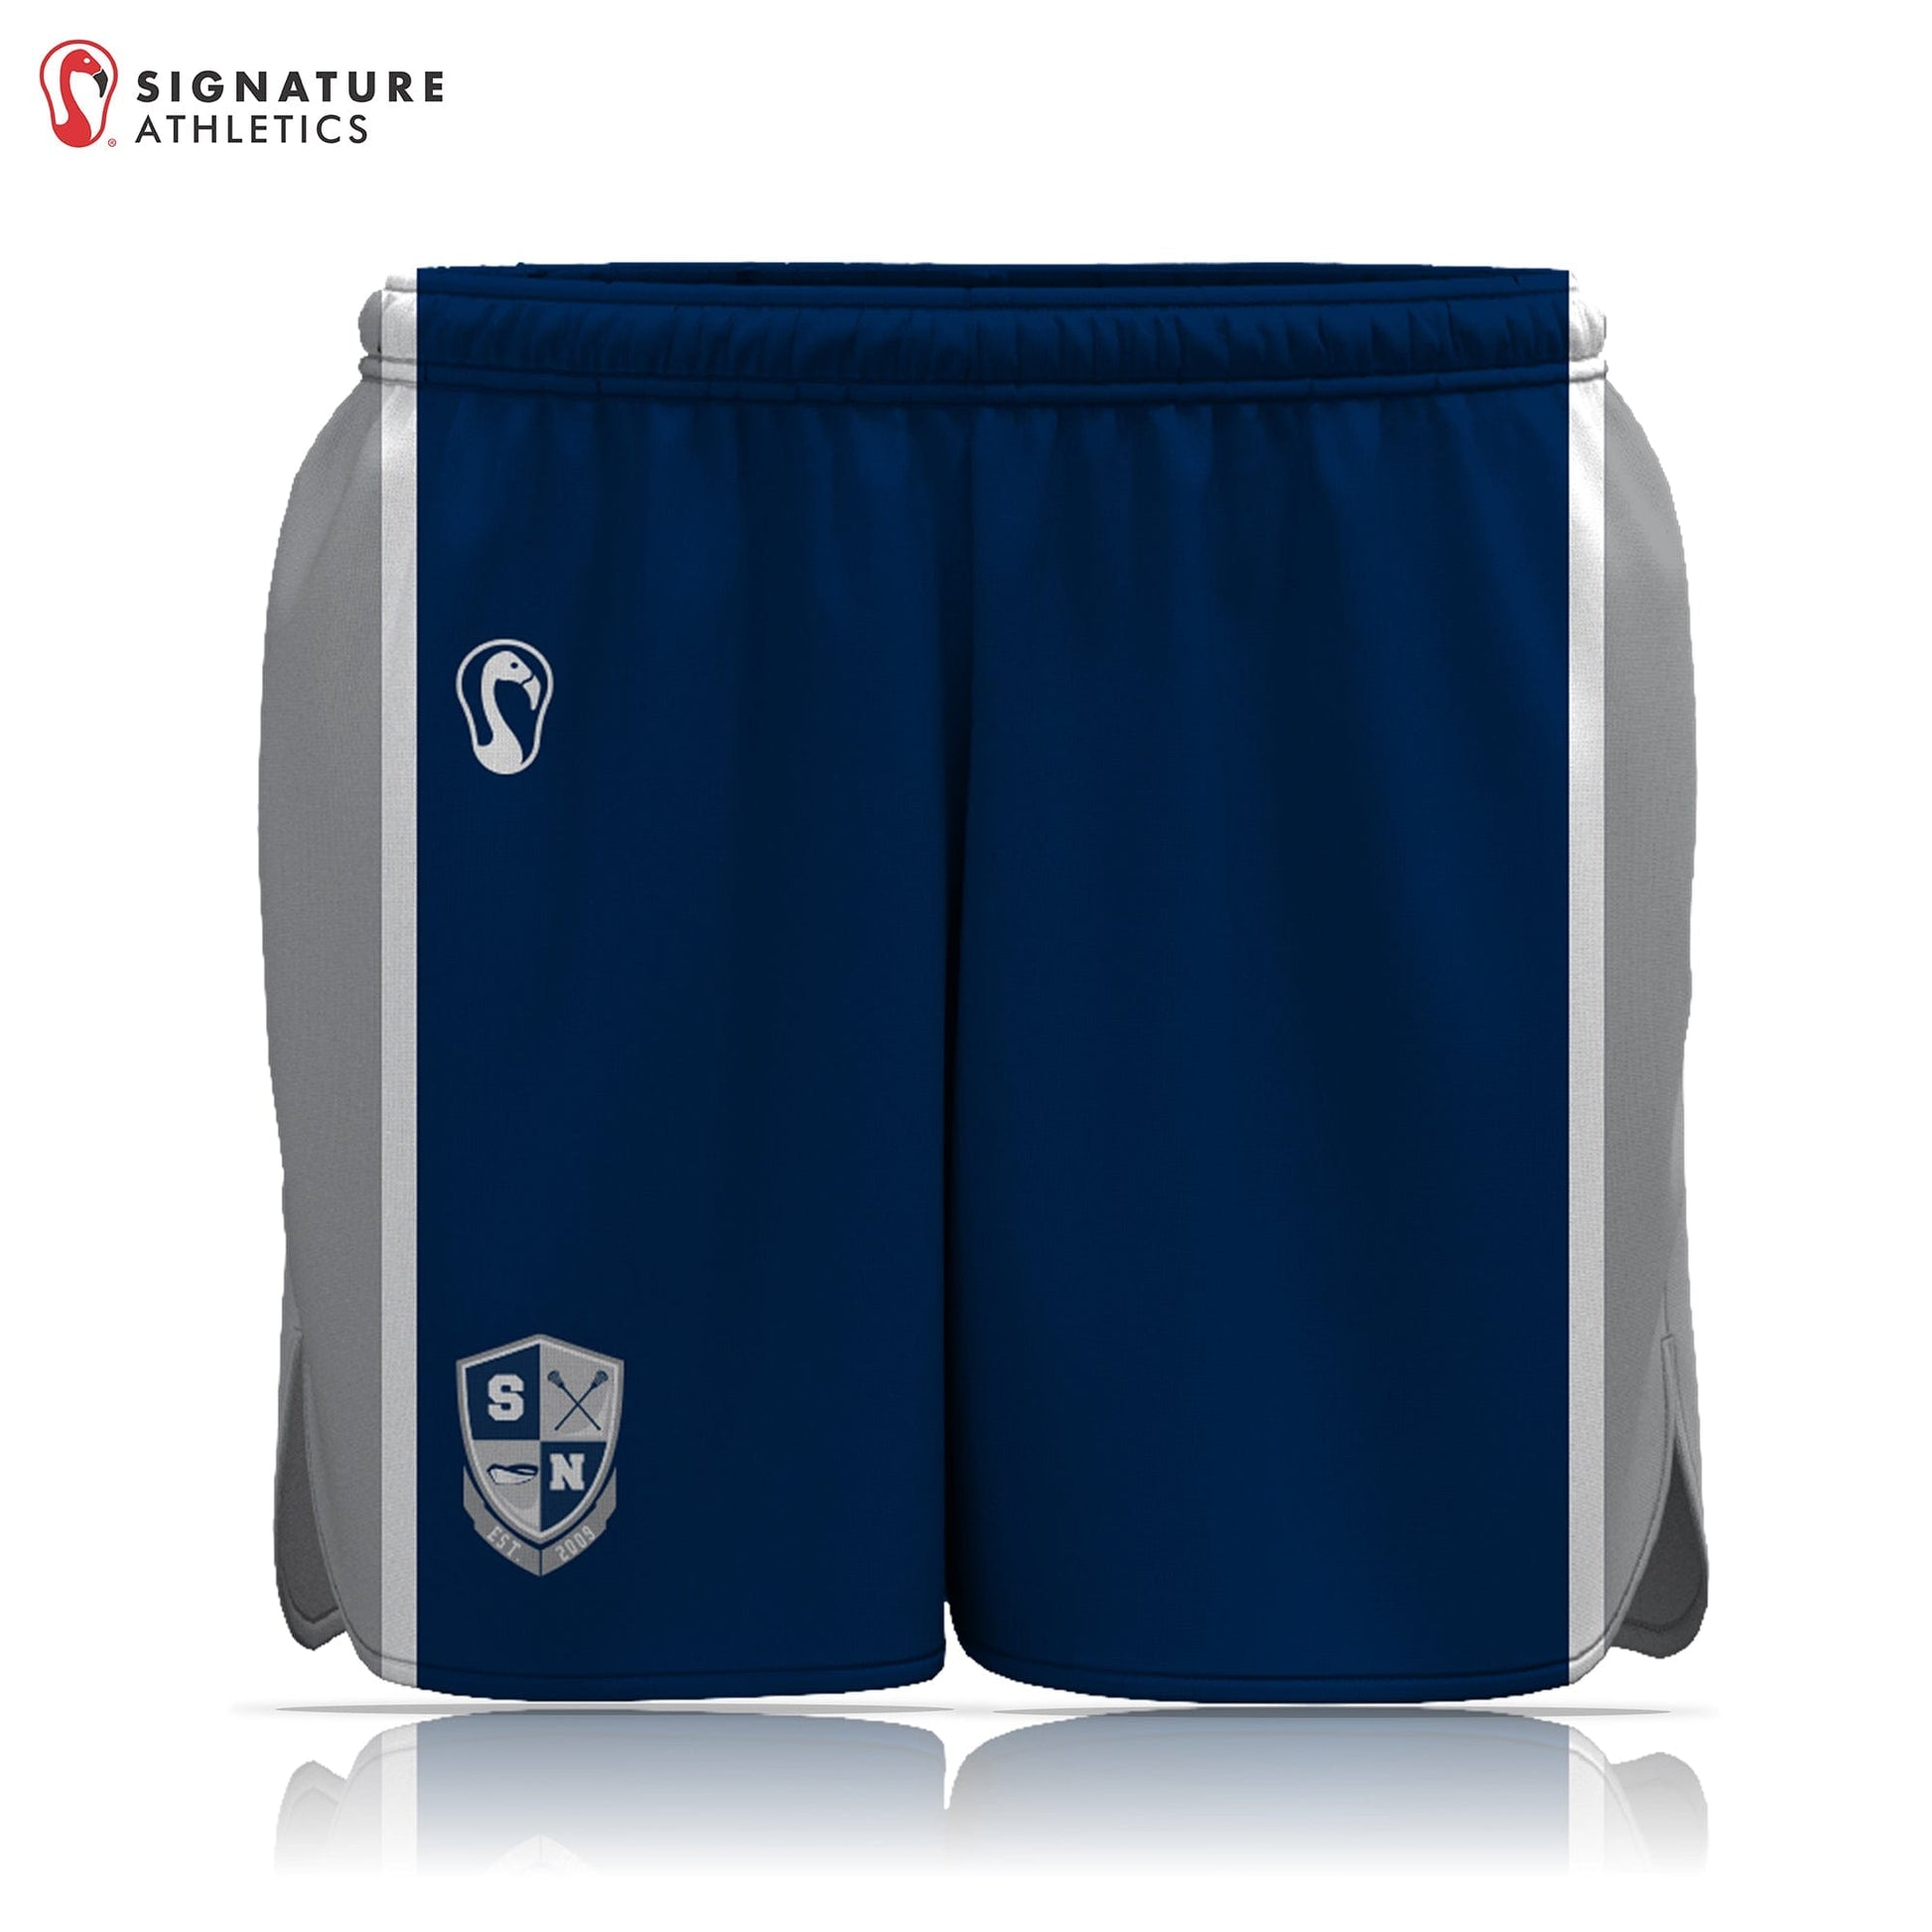 SNYL Team Swag Store Women's Game Shorts (Sold Seperately):GirlsU9 Signature Lacrosse